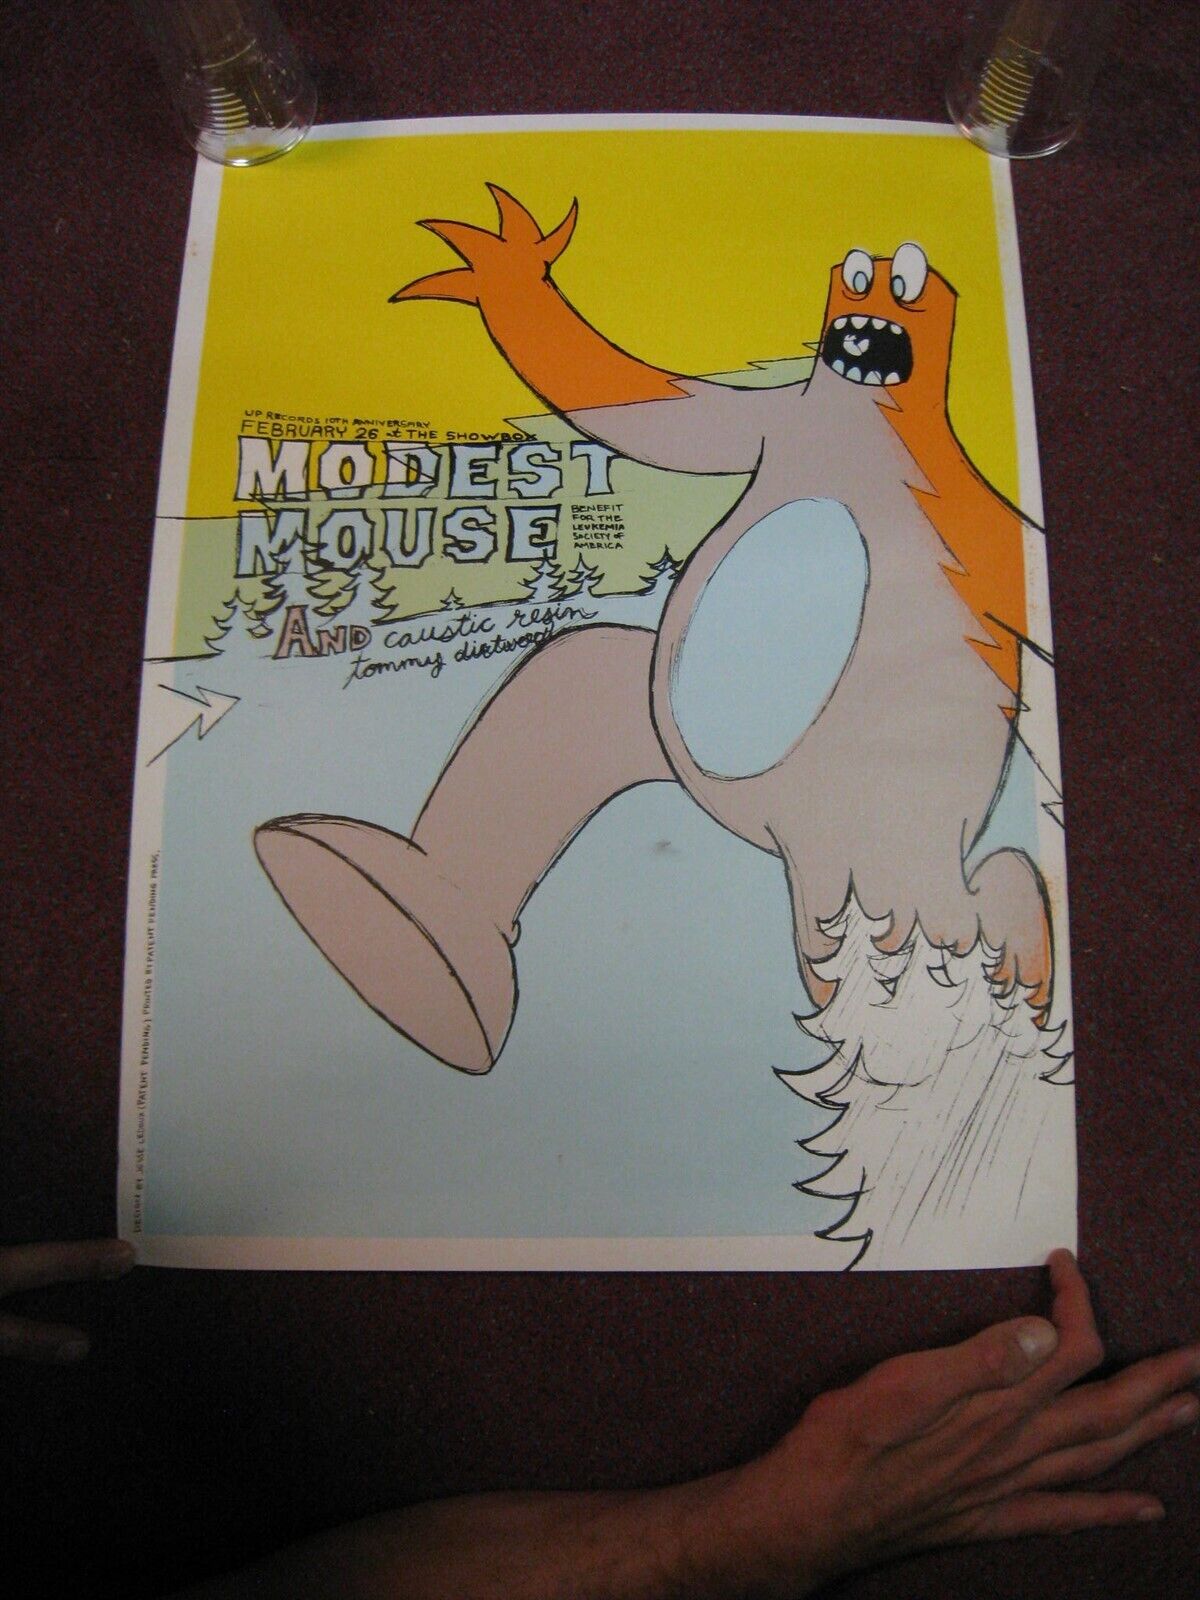 Modest Mouse Poster Caustic Resin Leukemia Benefit Feb 26